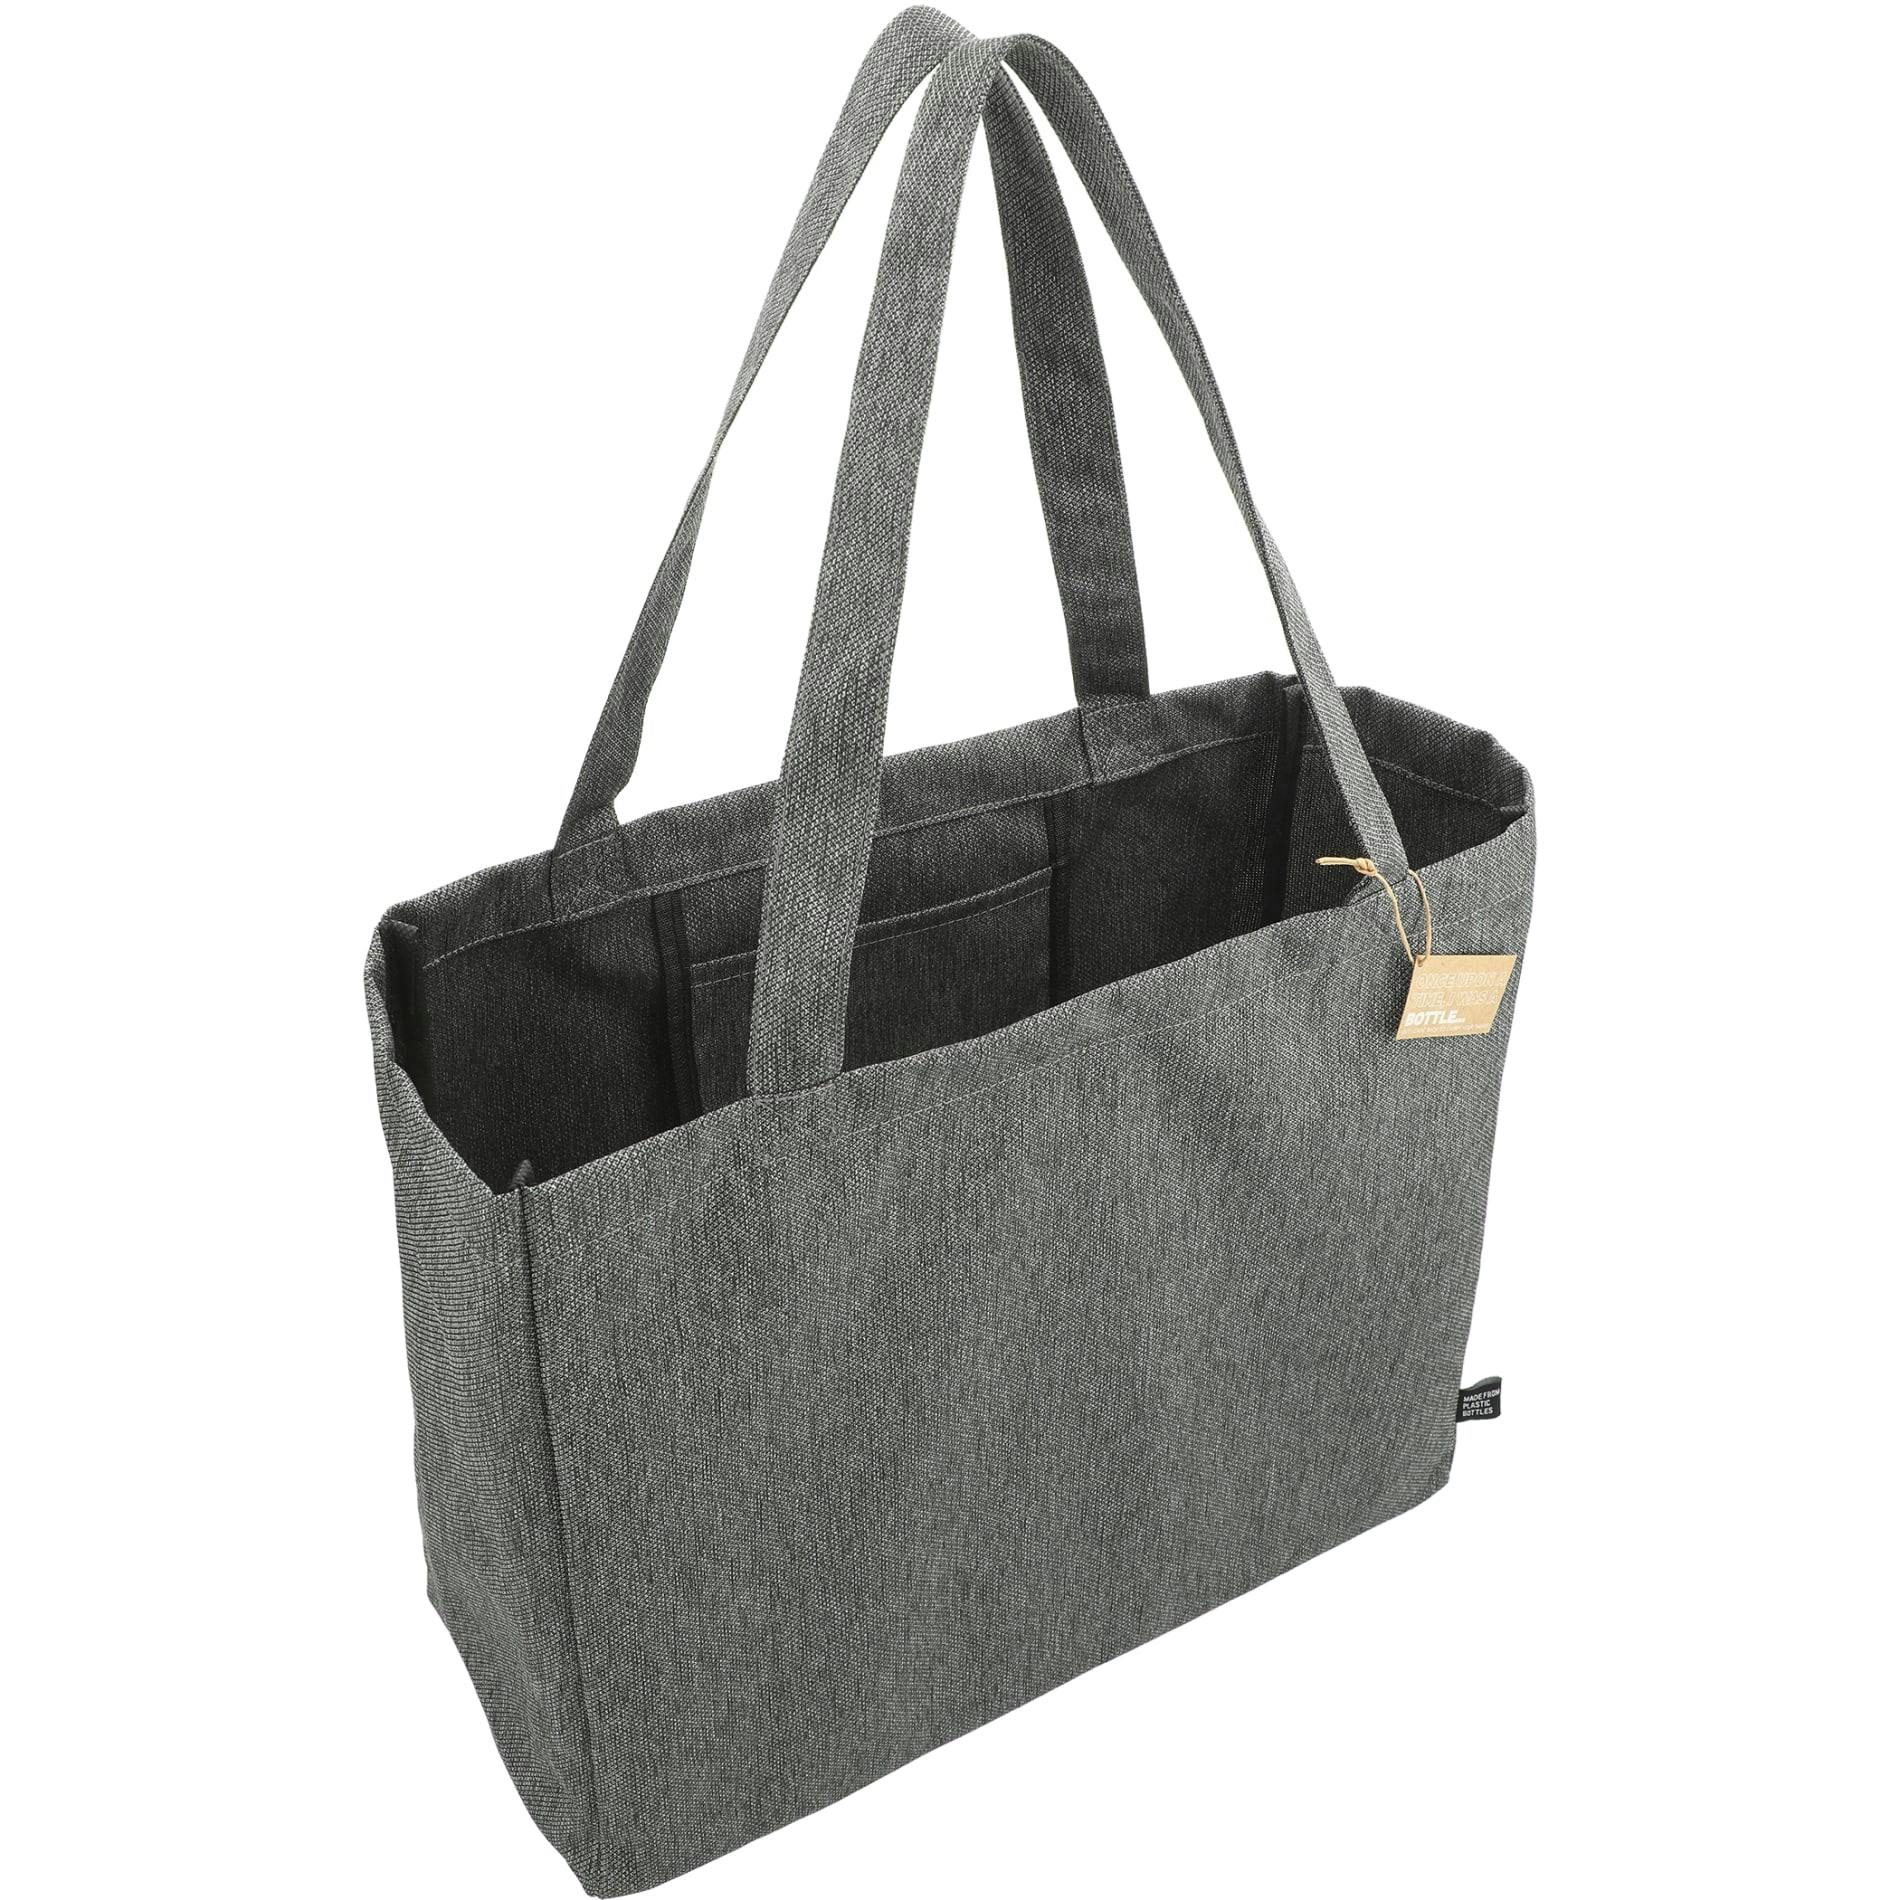 Vila Recycled All-Purpose Tote - additional Image 6